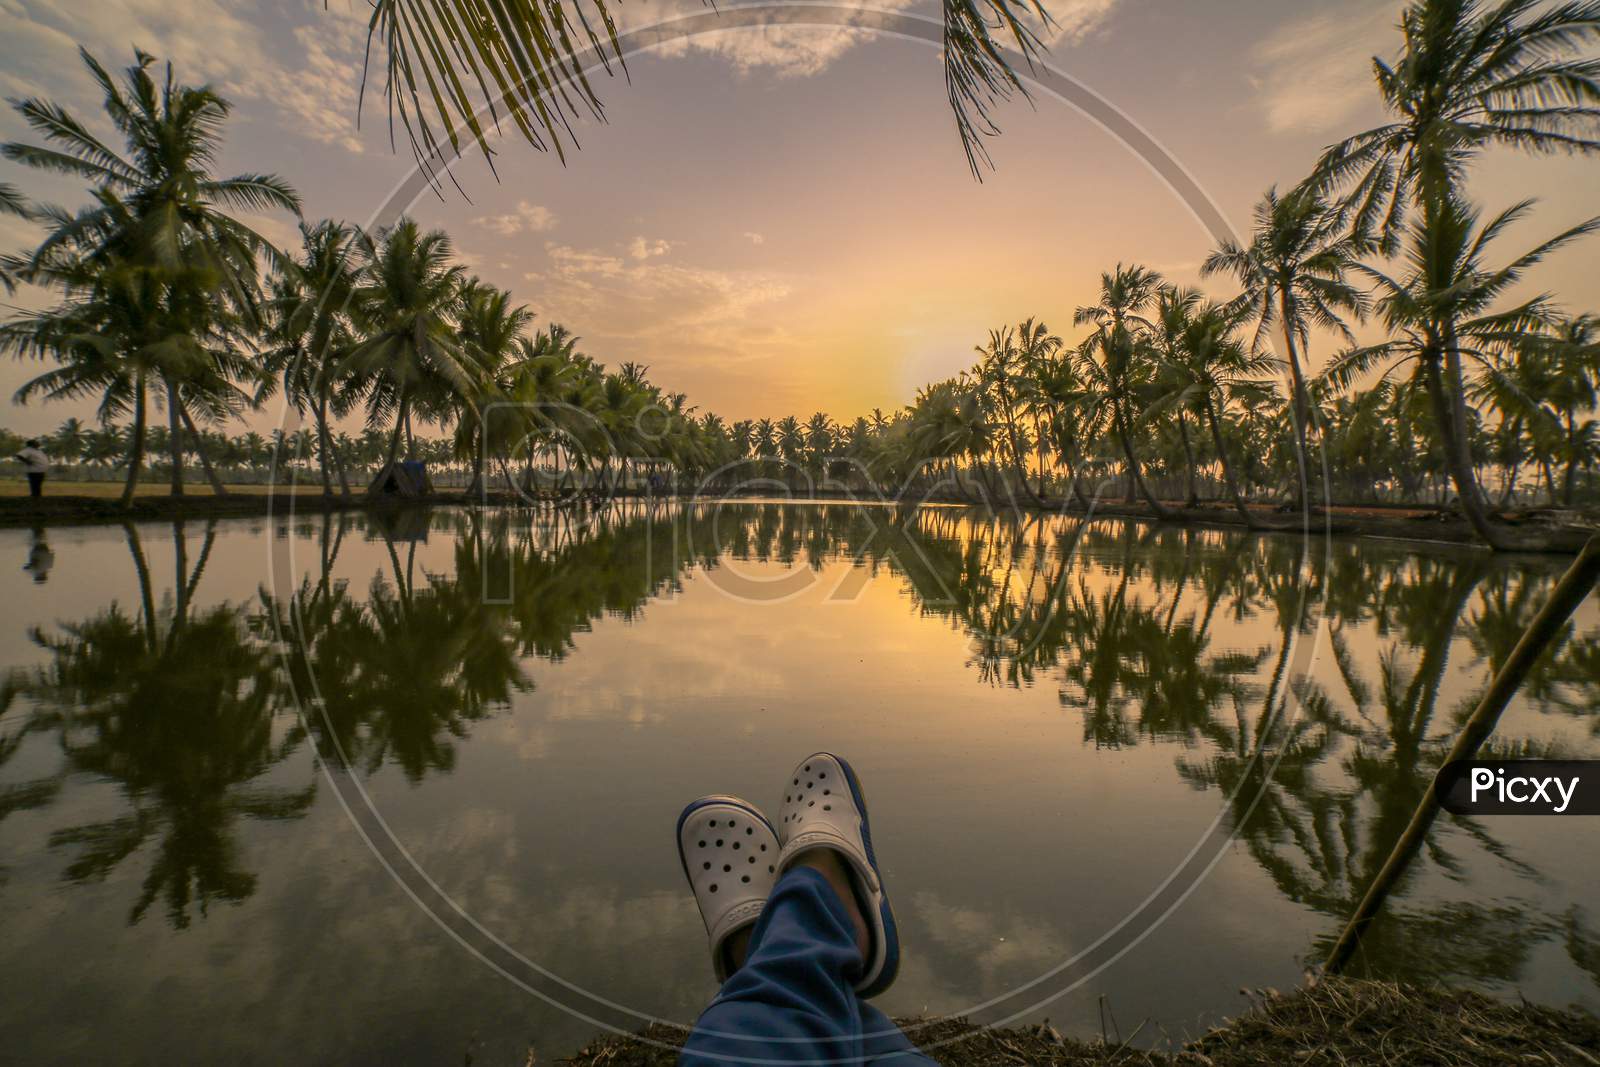 Indian man sitting by the coconut trees during sunset